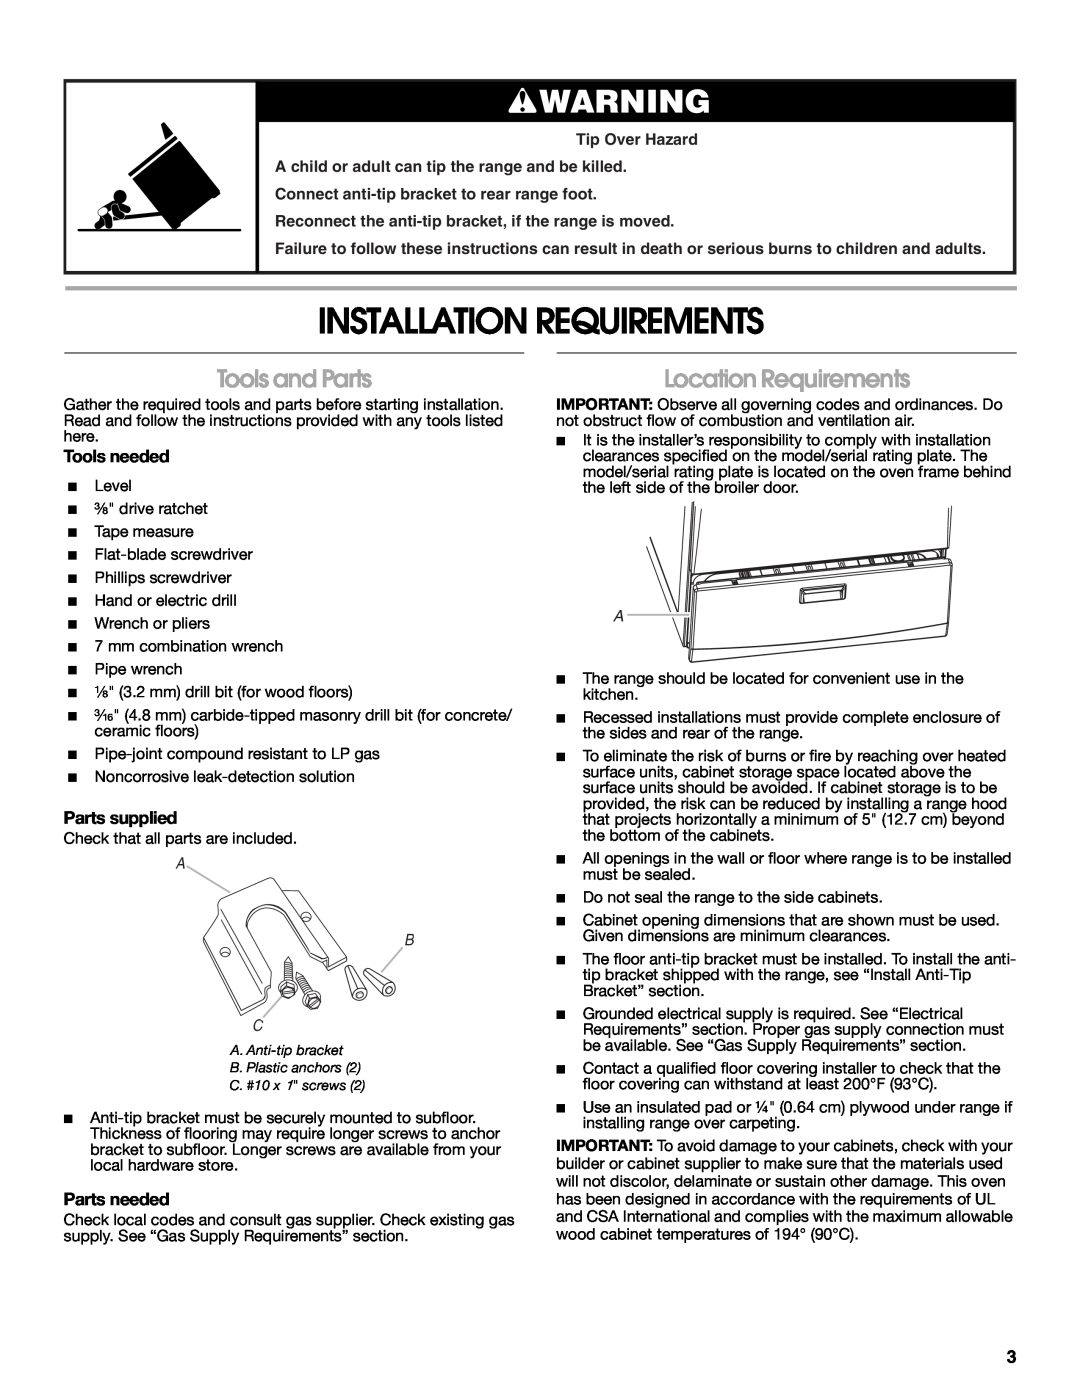 Whirlpool W10325493A Installation Requirements, Tools and Parts, Location Requirements, Tools needed, Parts supplied 